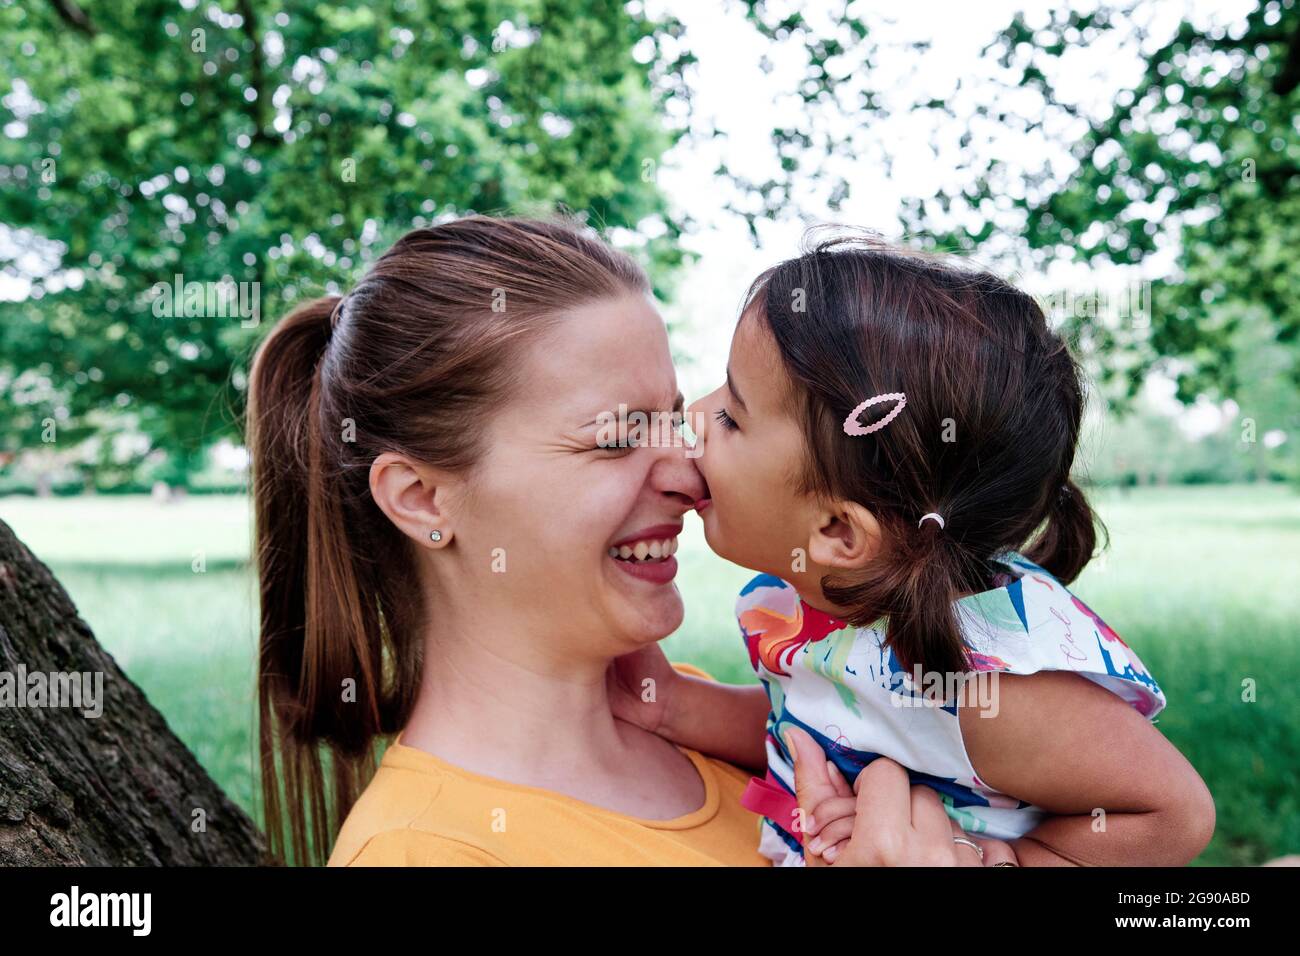 Girl biting mother's nose at park Stock Photo